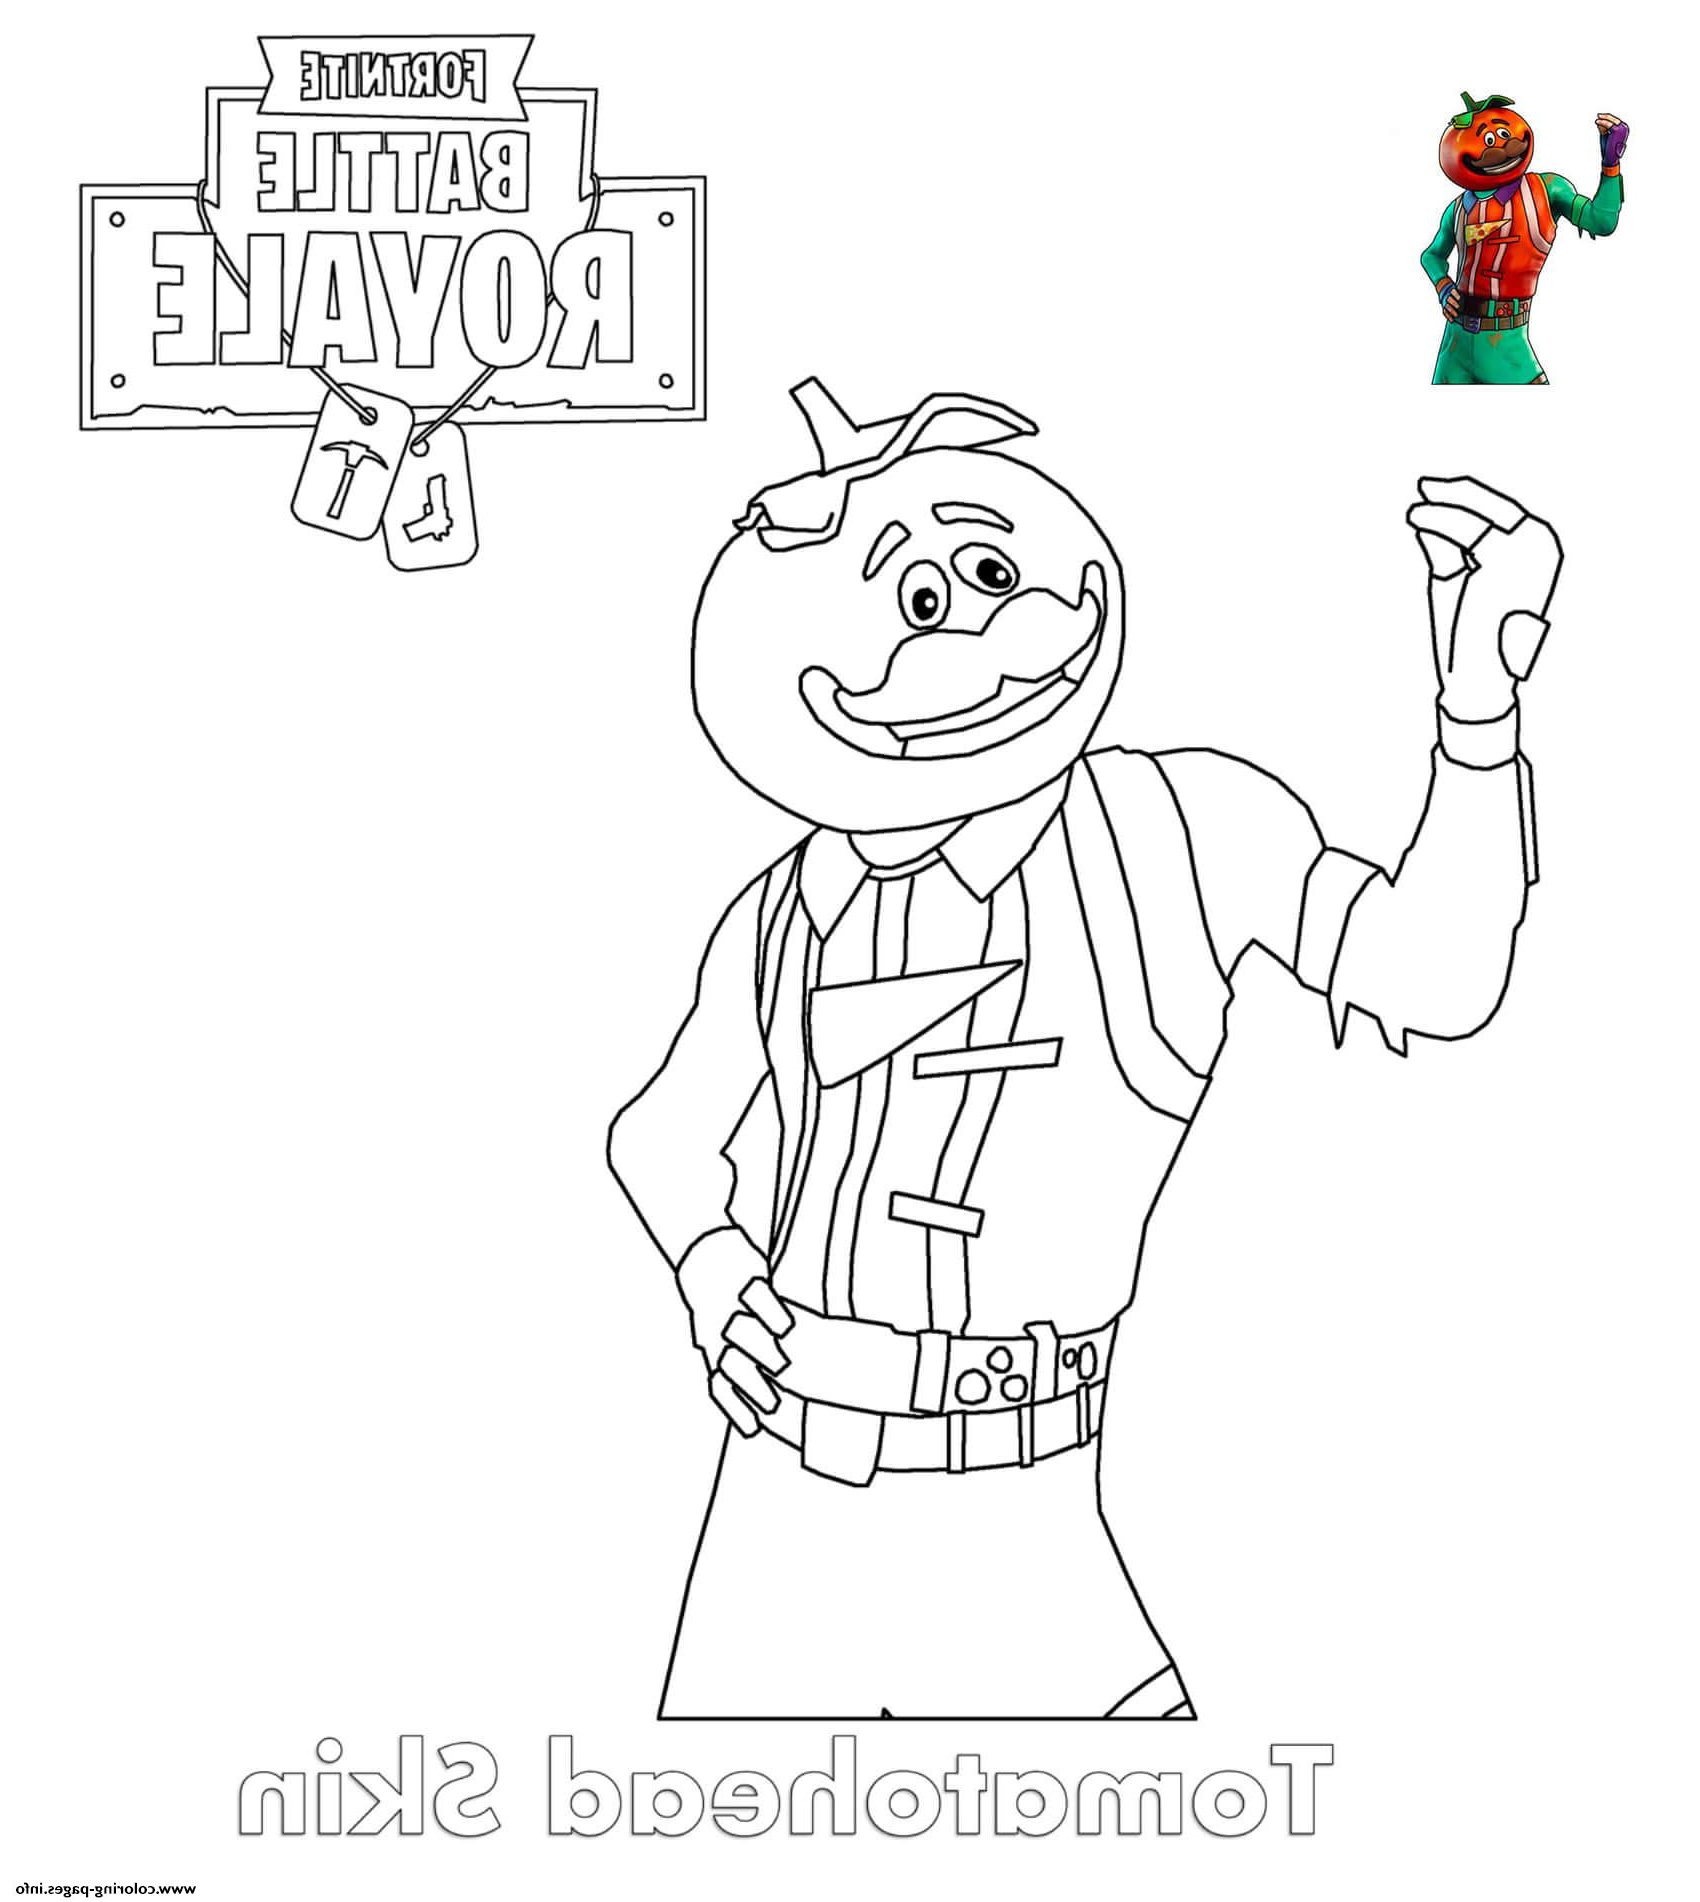 Fornite Dessin Nouveau Photos tomatohead Skin fortnite Coloring Pages Printable